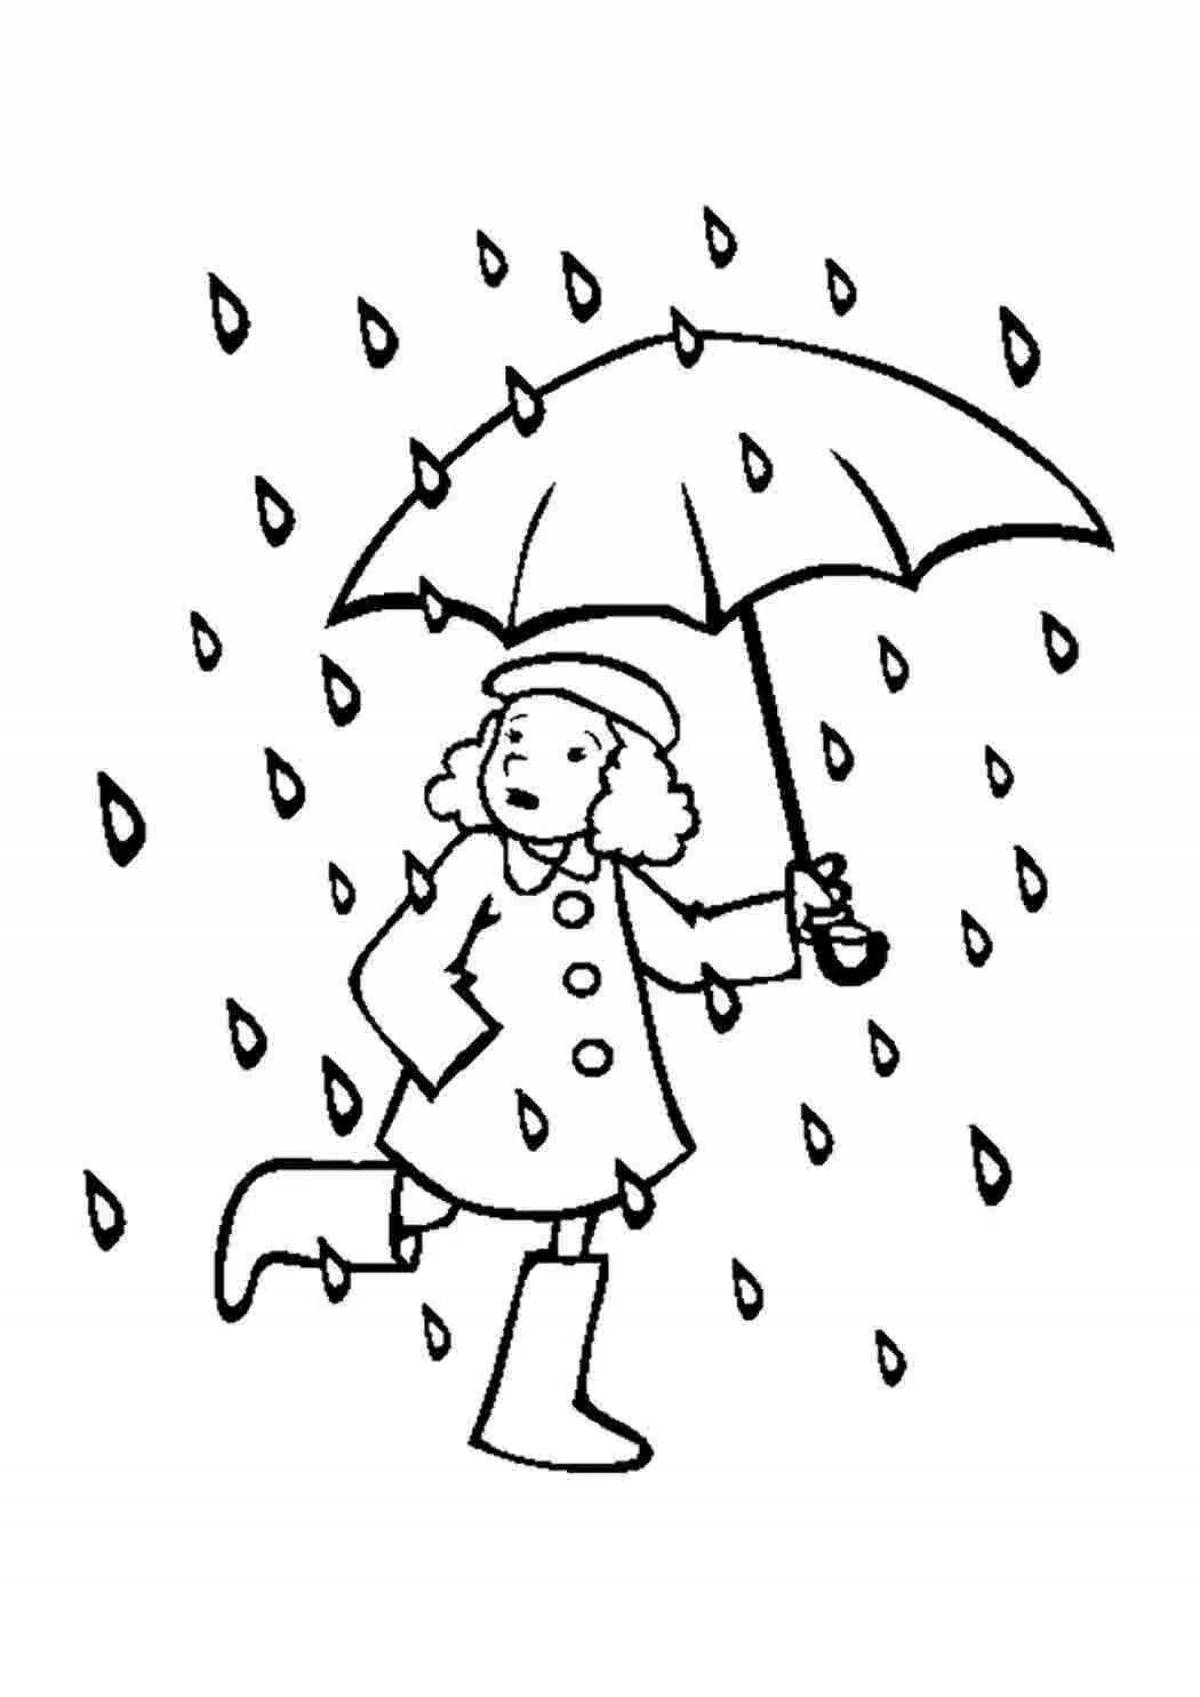 Rainy rain coloring pages for kids